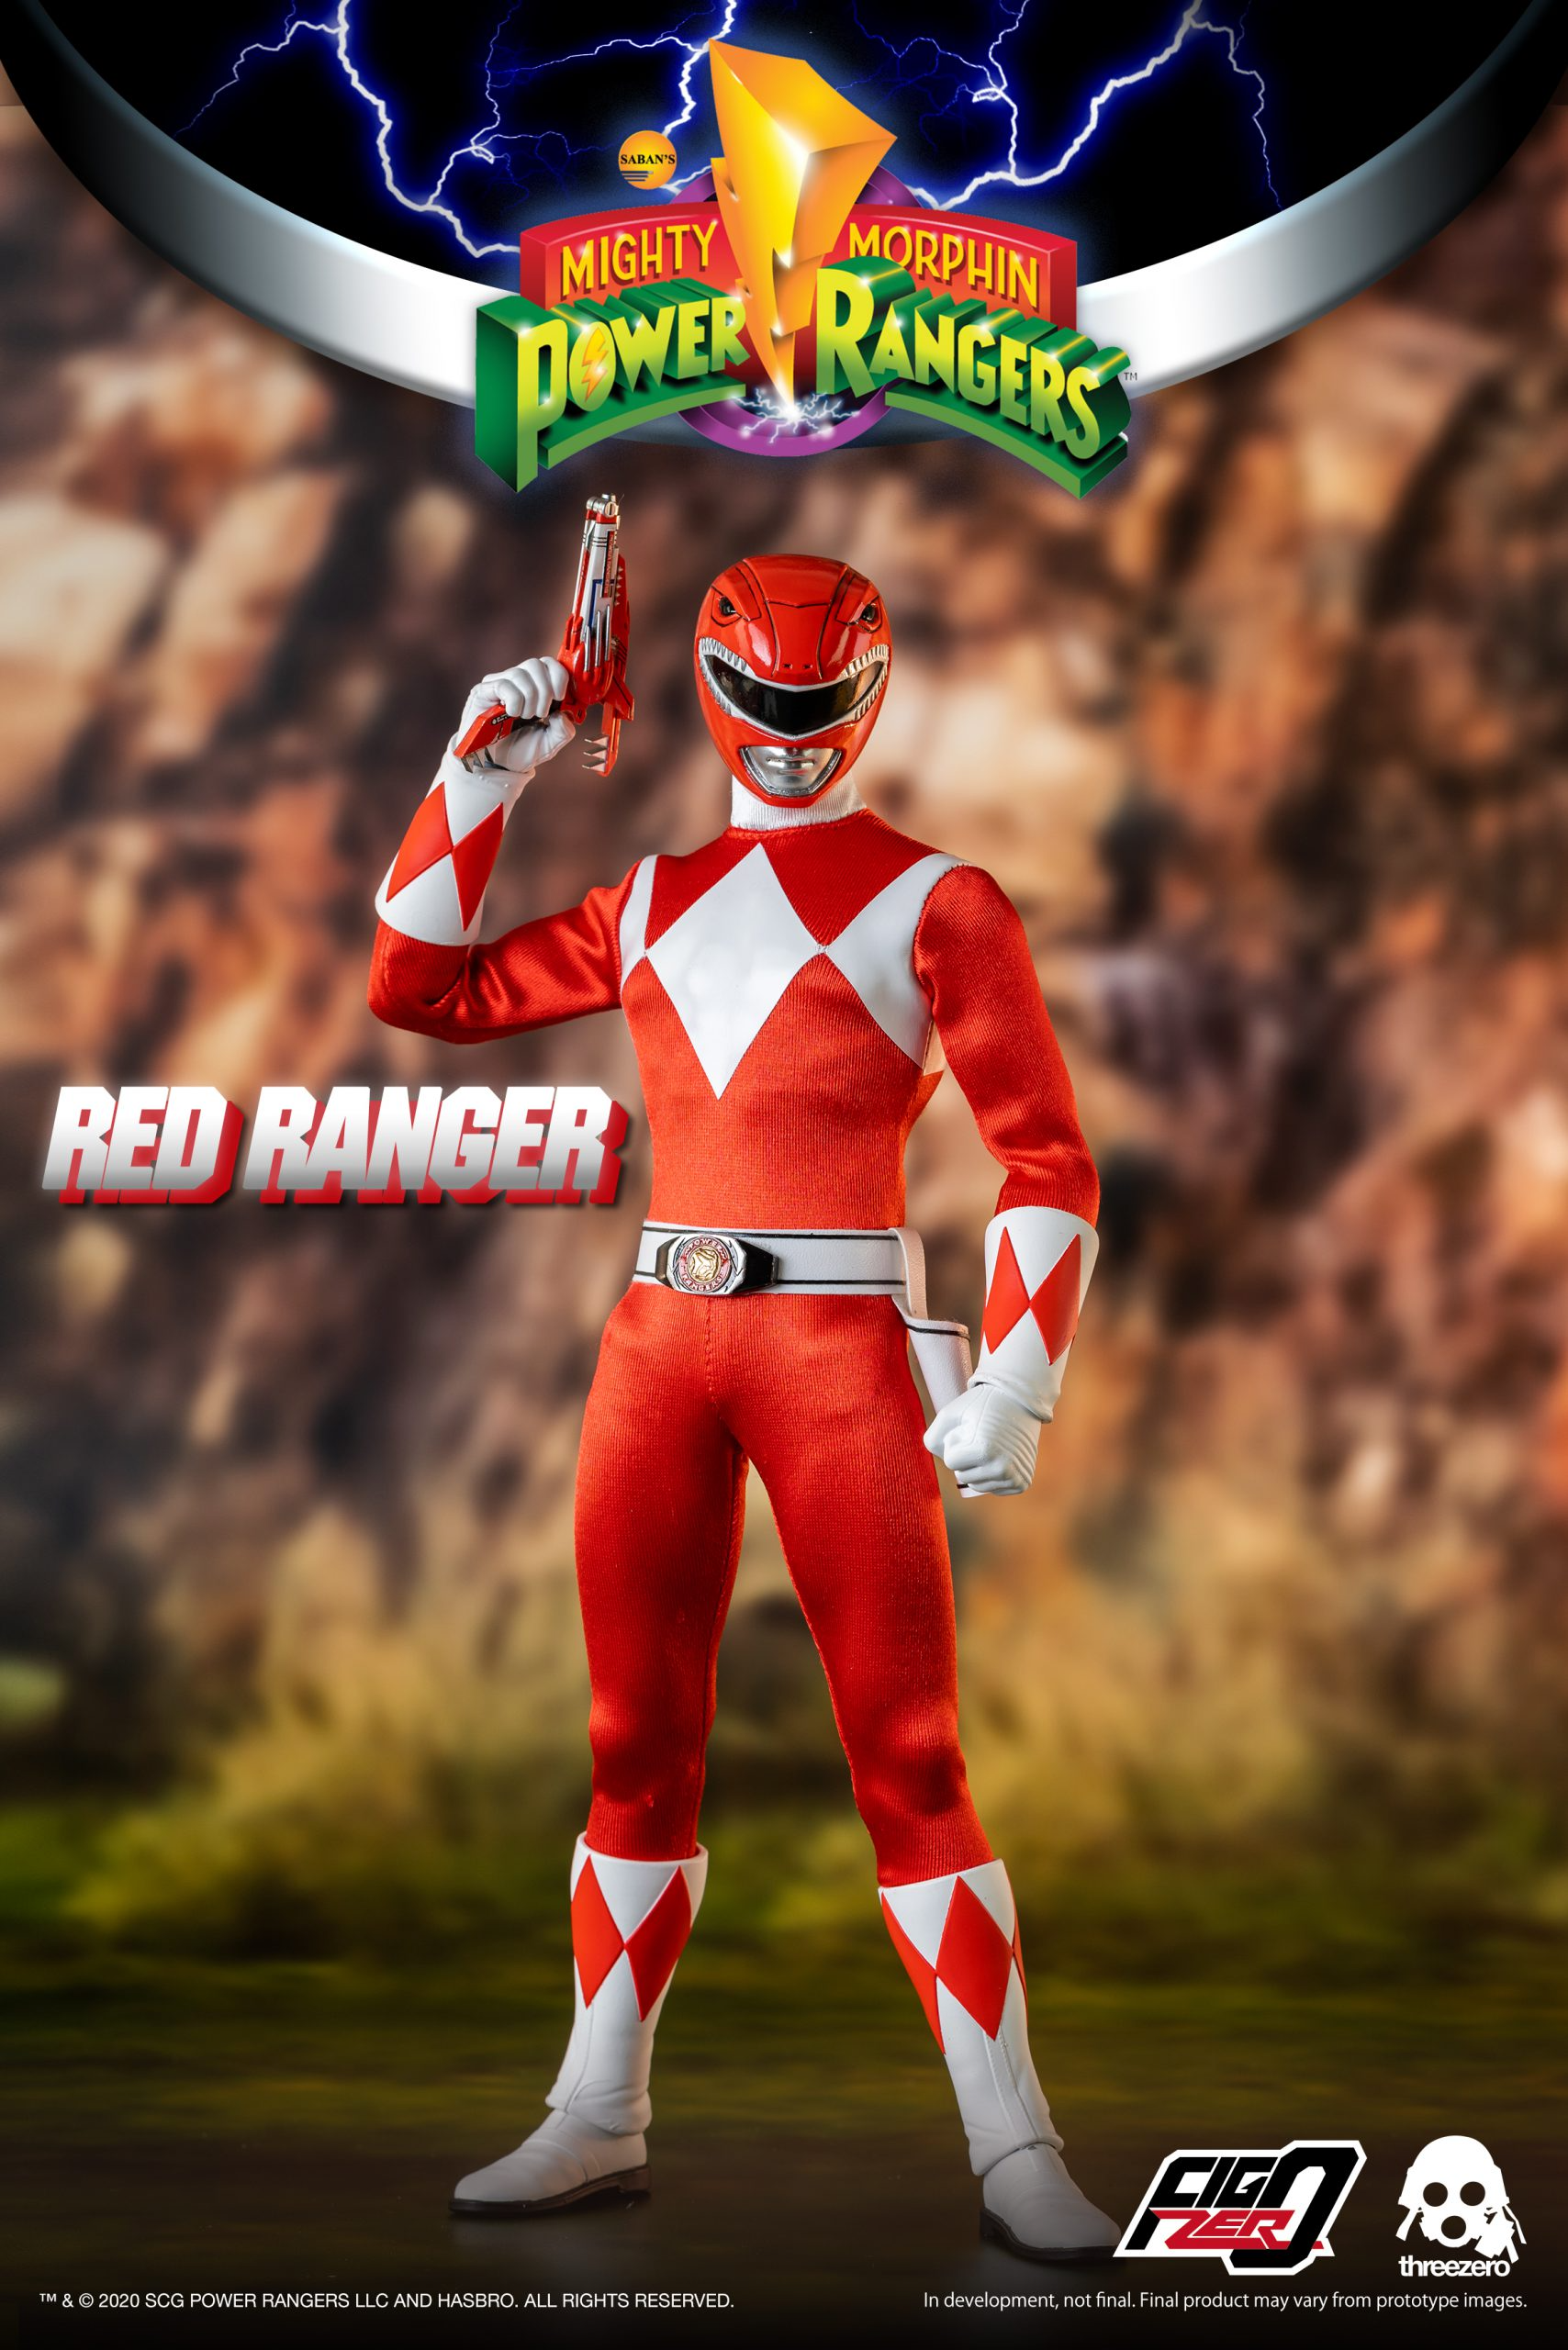 Mighty Morphin Power Rangers 1 6 From Threezero For Pre Orders Now